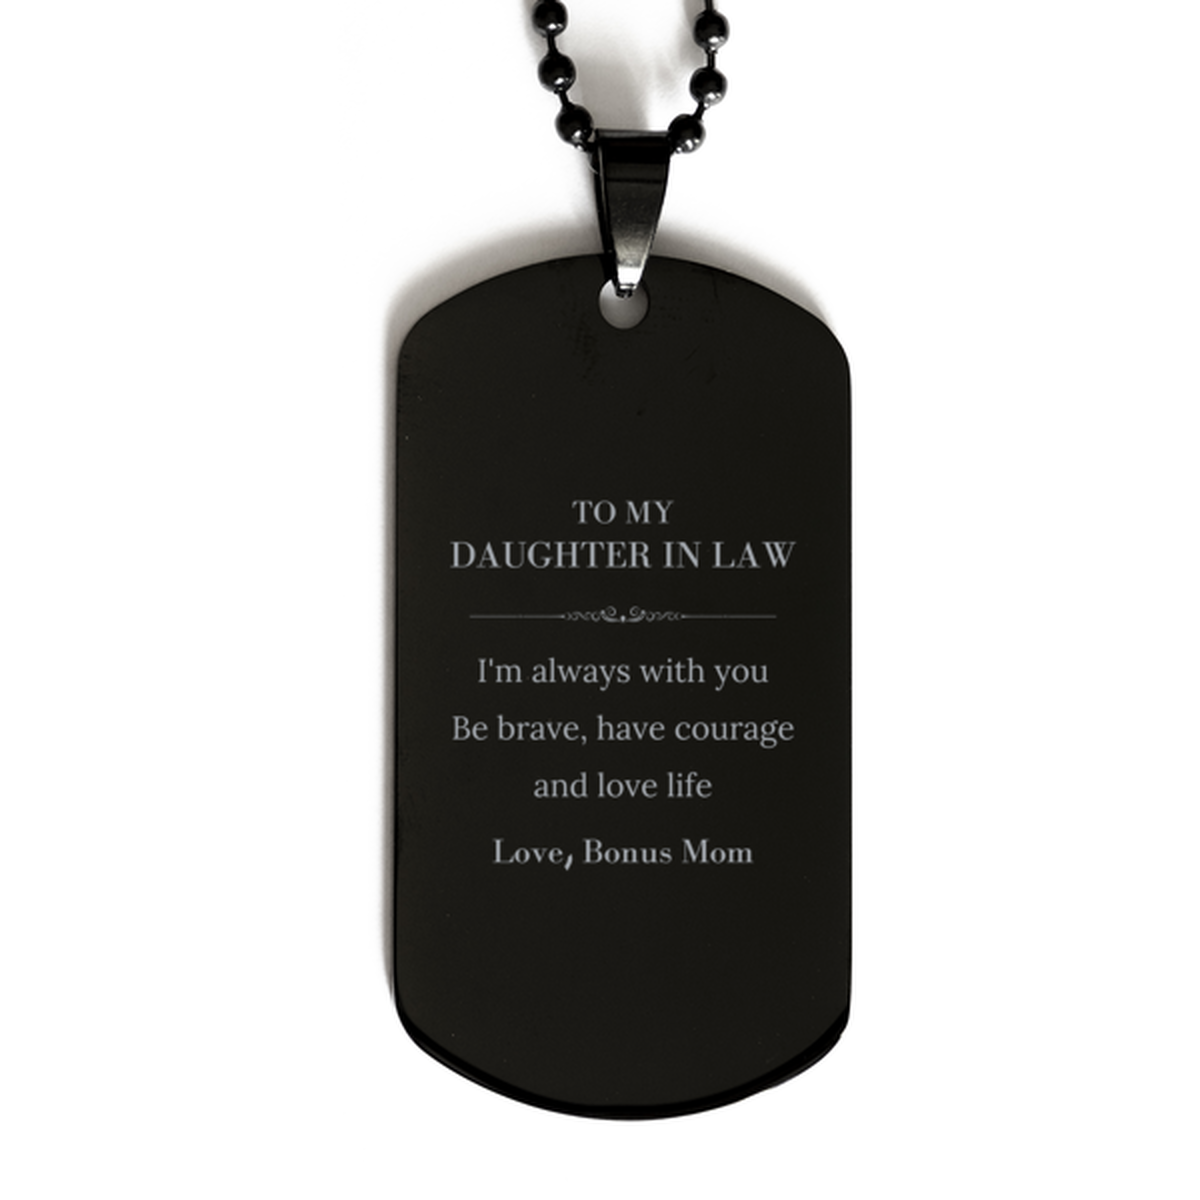 To My Daughter In Law Gifts from Bonus Mom, Unique Black Dog Tag Inspirational Christmas Birthday Graduation Gifts for Daughter In Law I'm always with you. Be brave, have courage and love life. Love, Bonus Mom